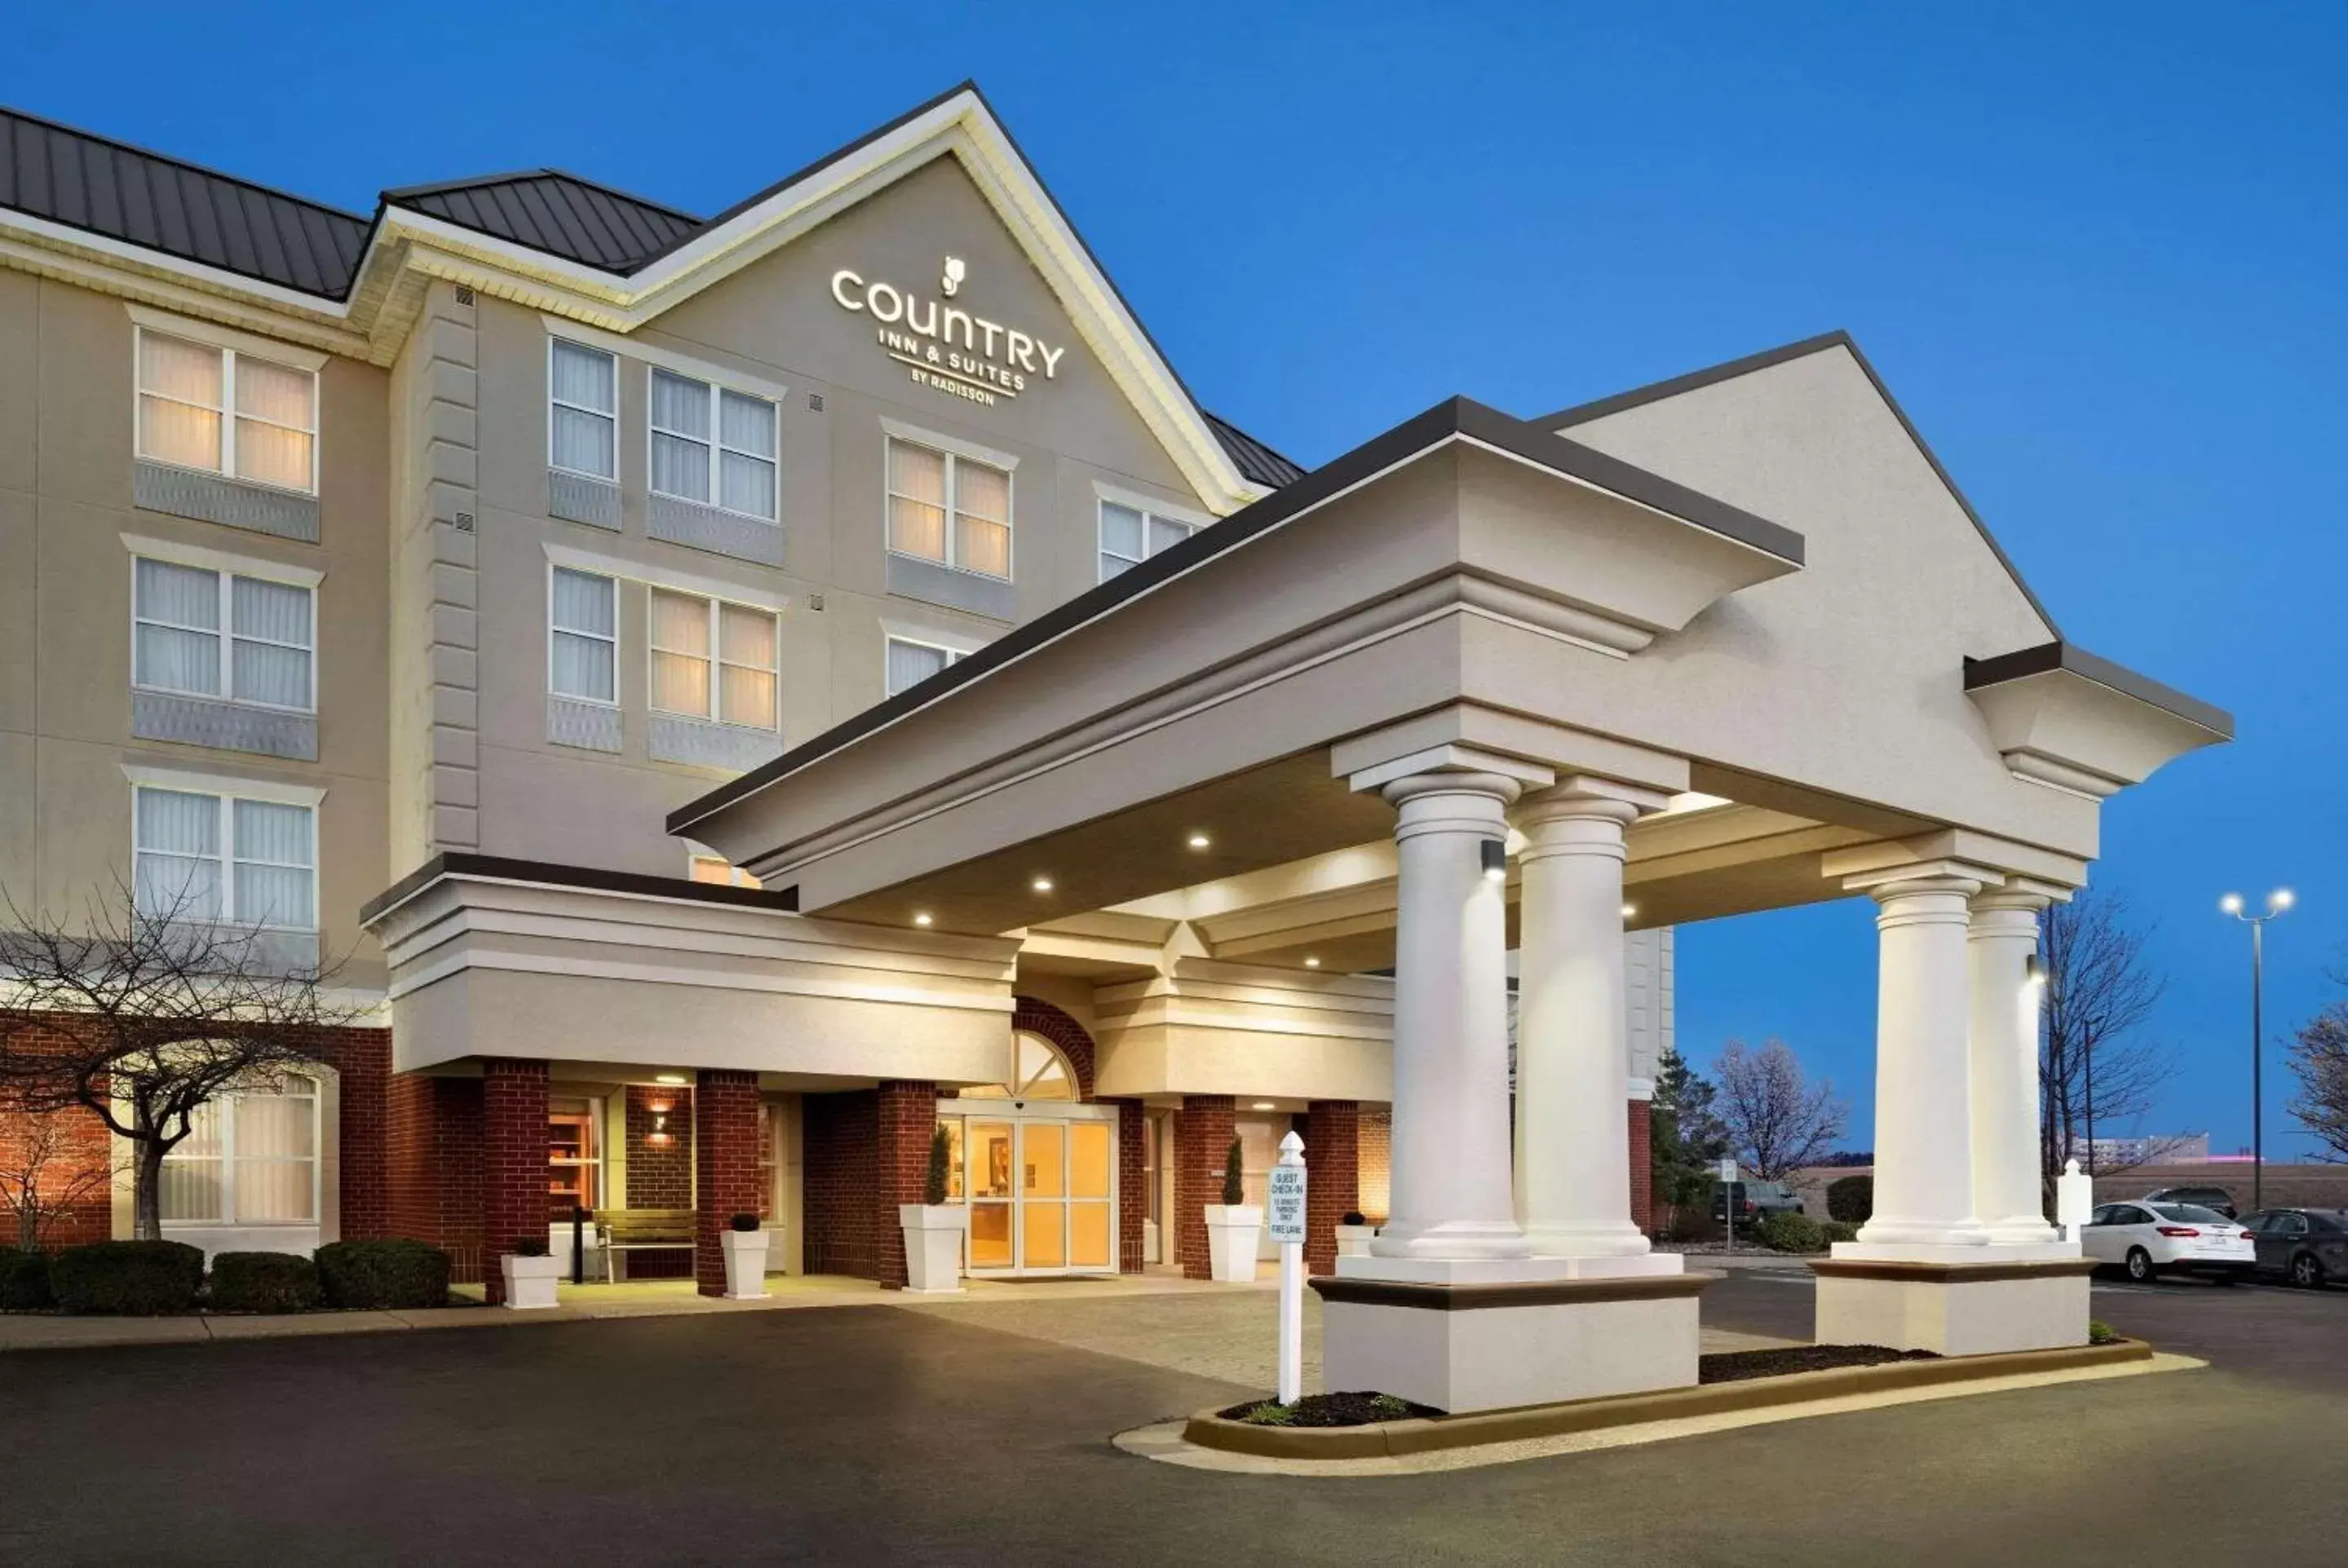 Property Building in Country Inn & Suites by Radisson, Evansville, IN